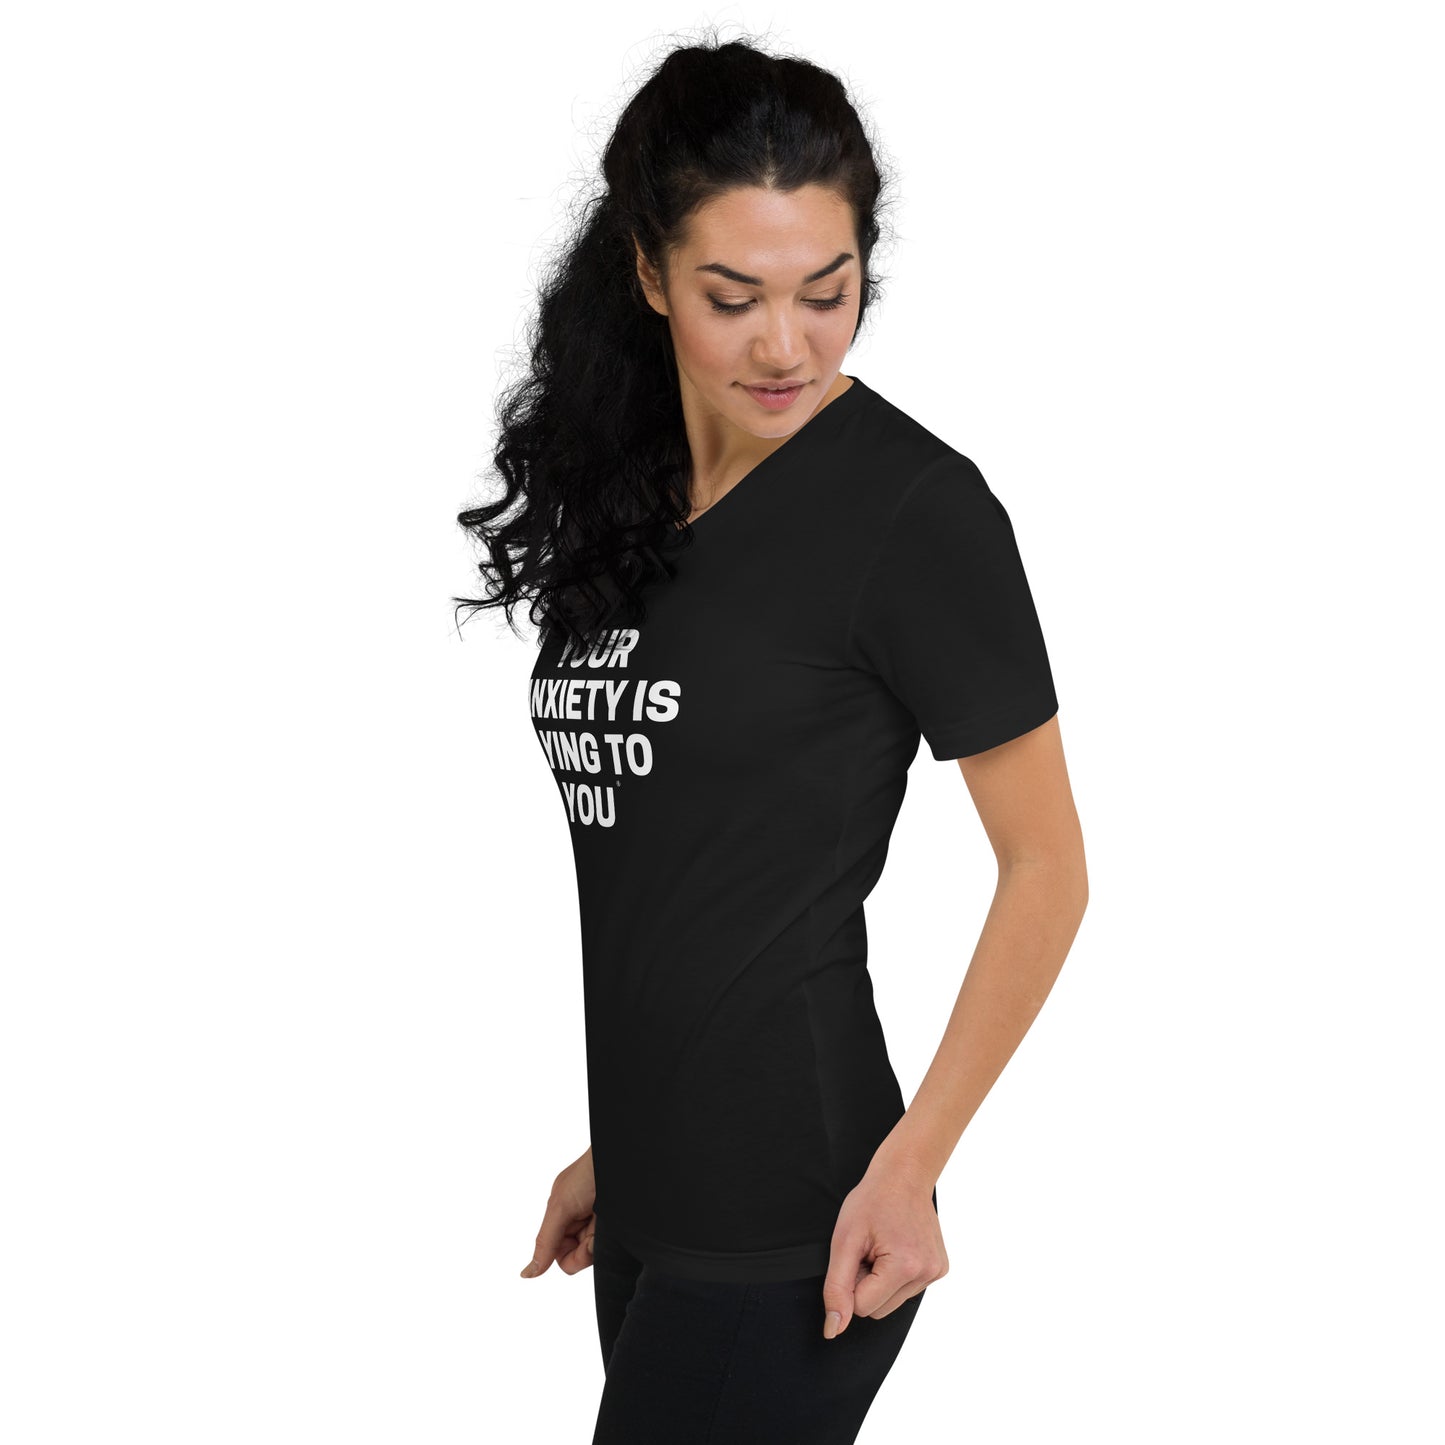 Your Anxiety is Lying to You- Unisex Short Sleeve V-Neck T-Shirt